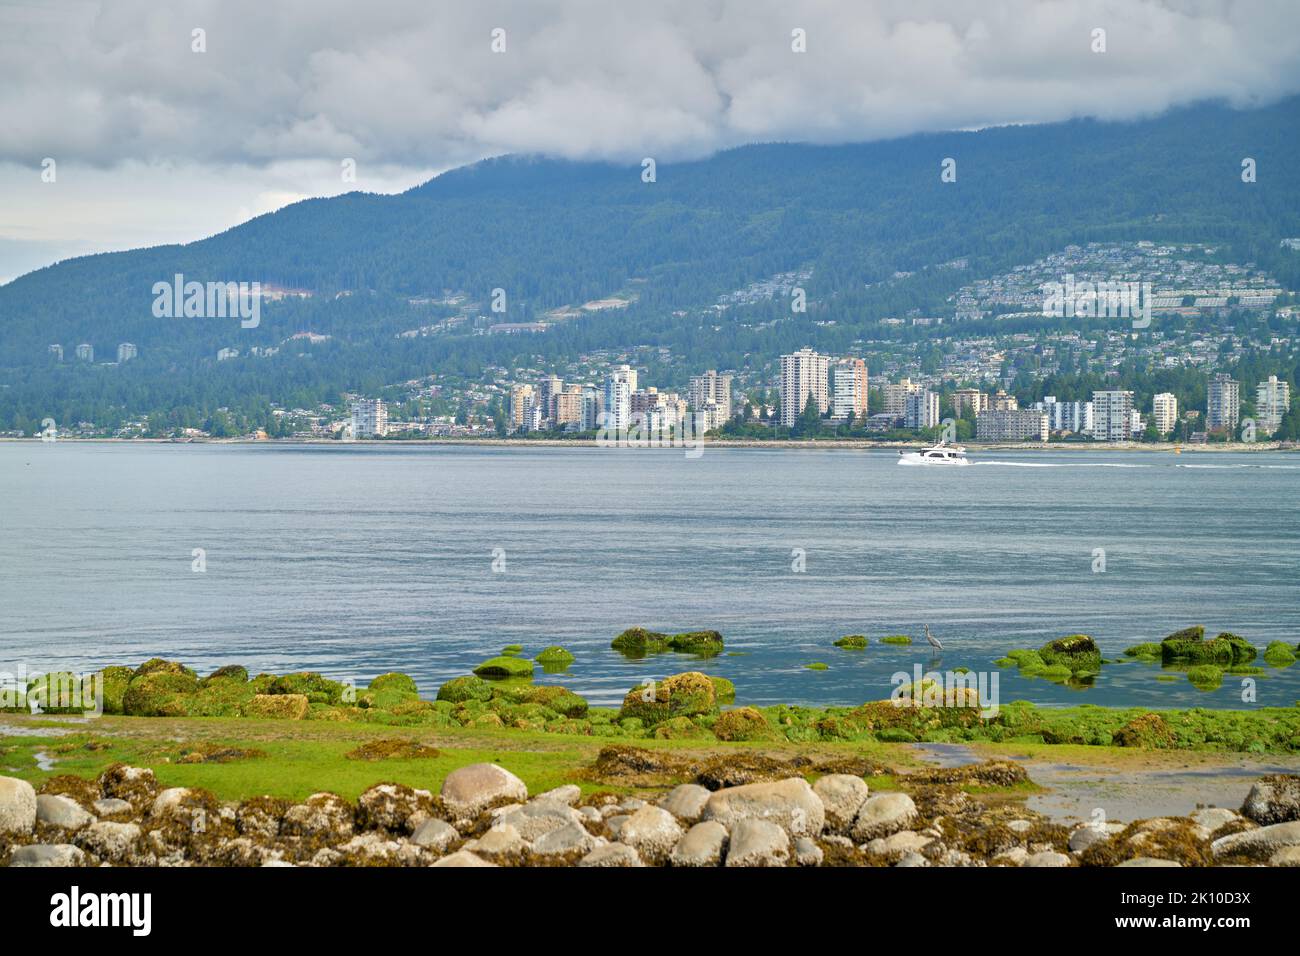 West Vancouver and Coast Mountains. The Coast Mountains and West Vancouver skyline across English Bay, Vancouver. Stock Photo